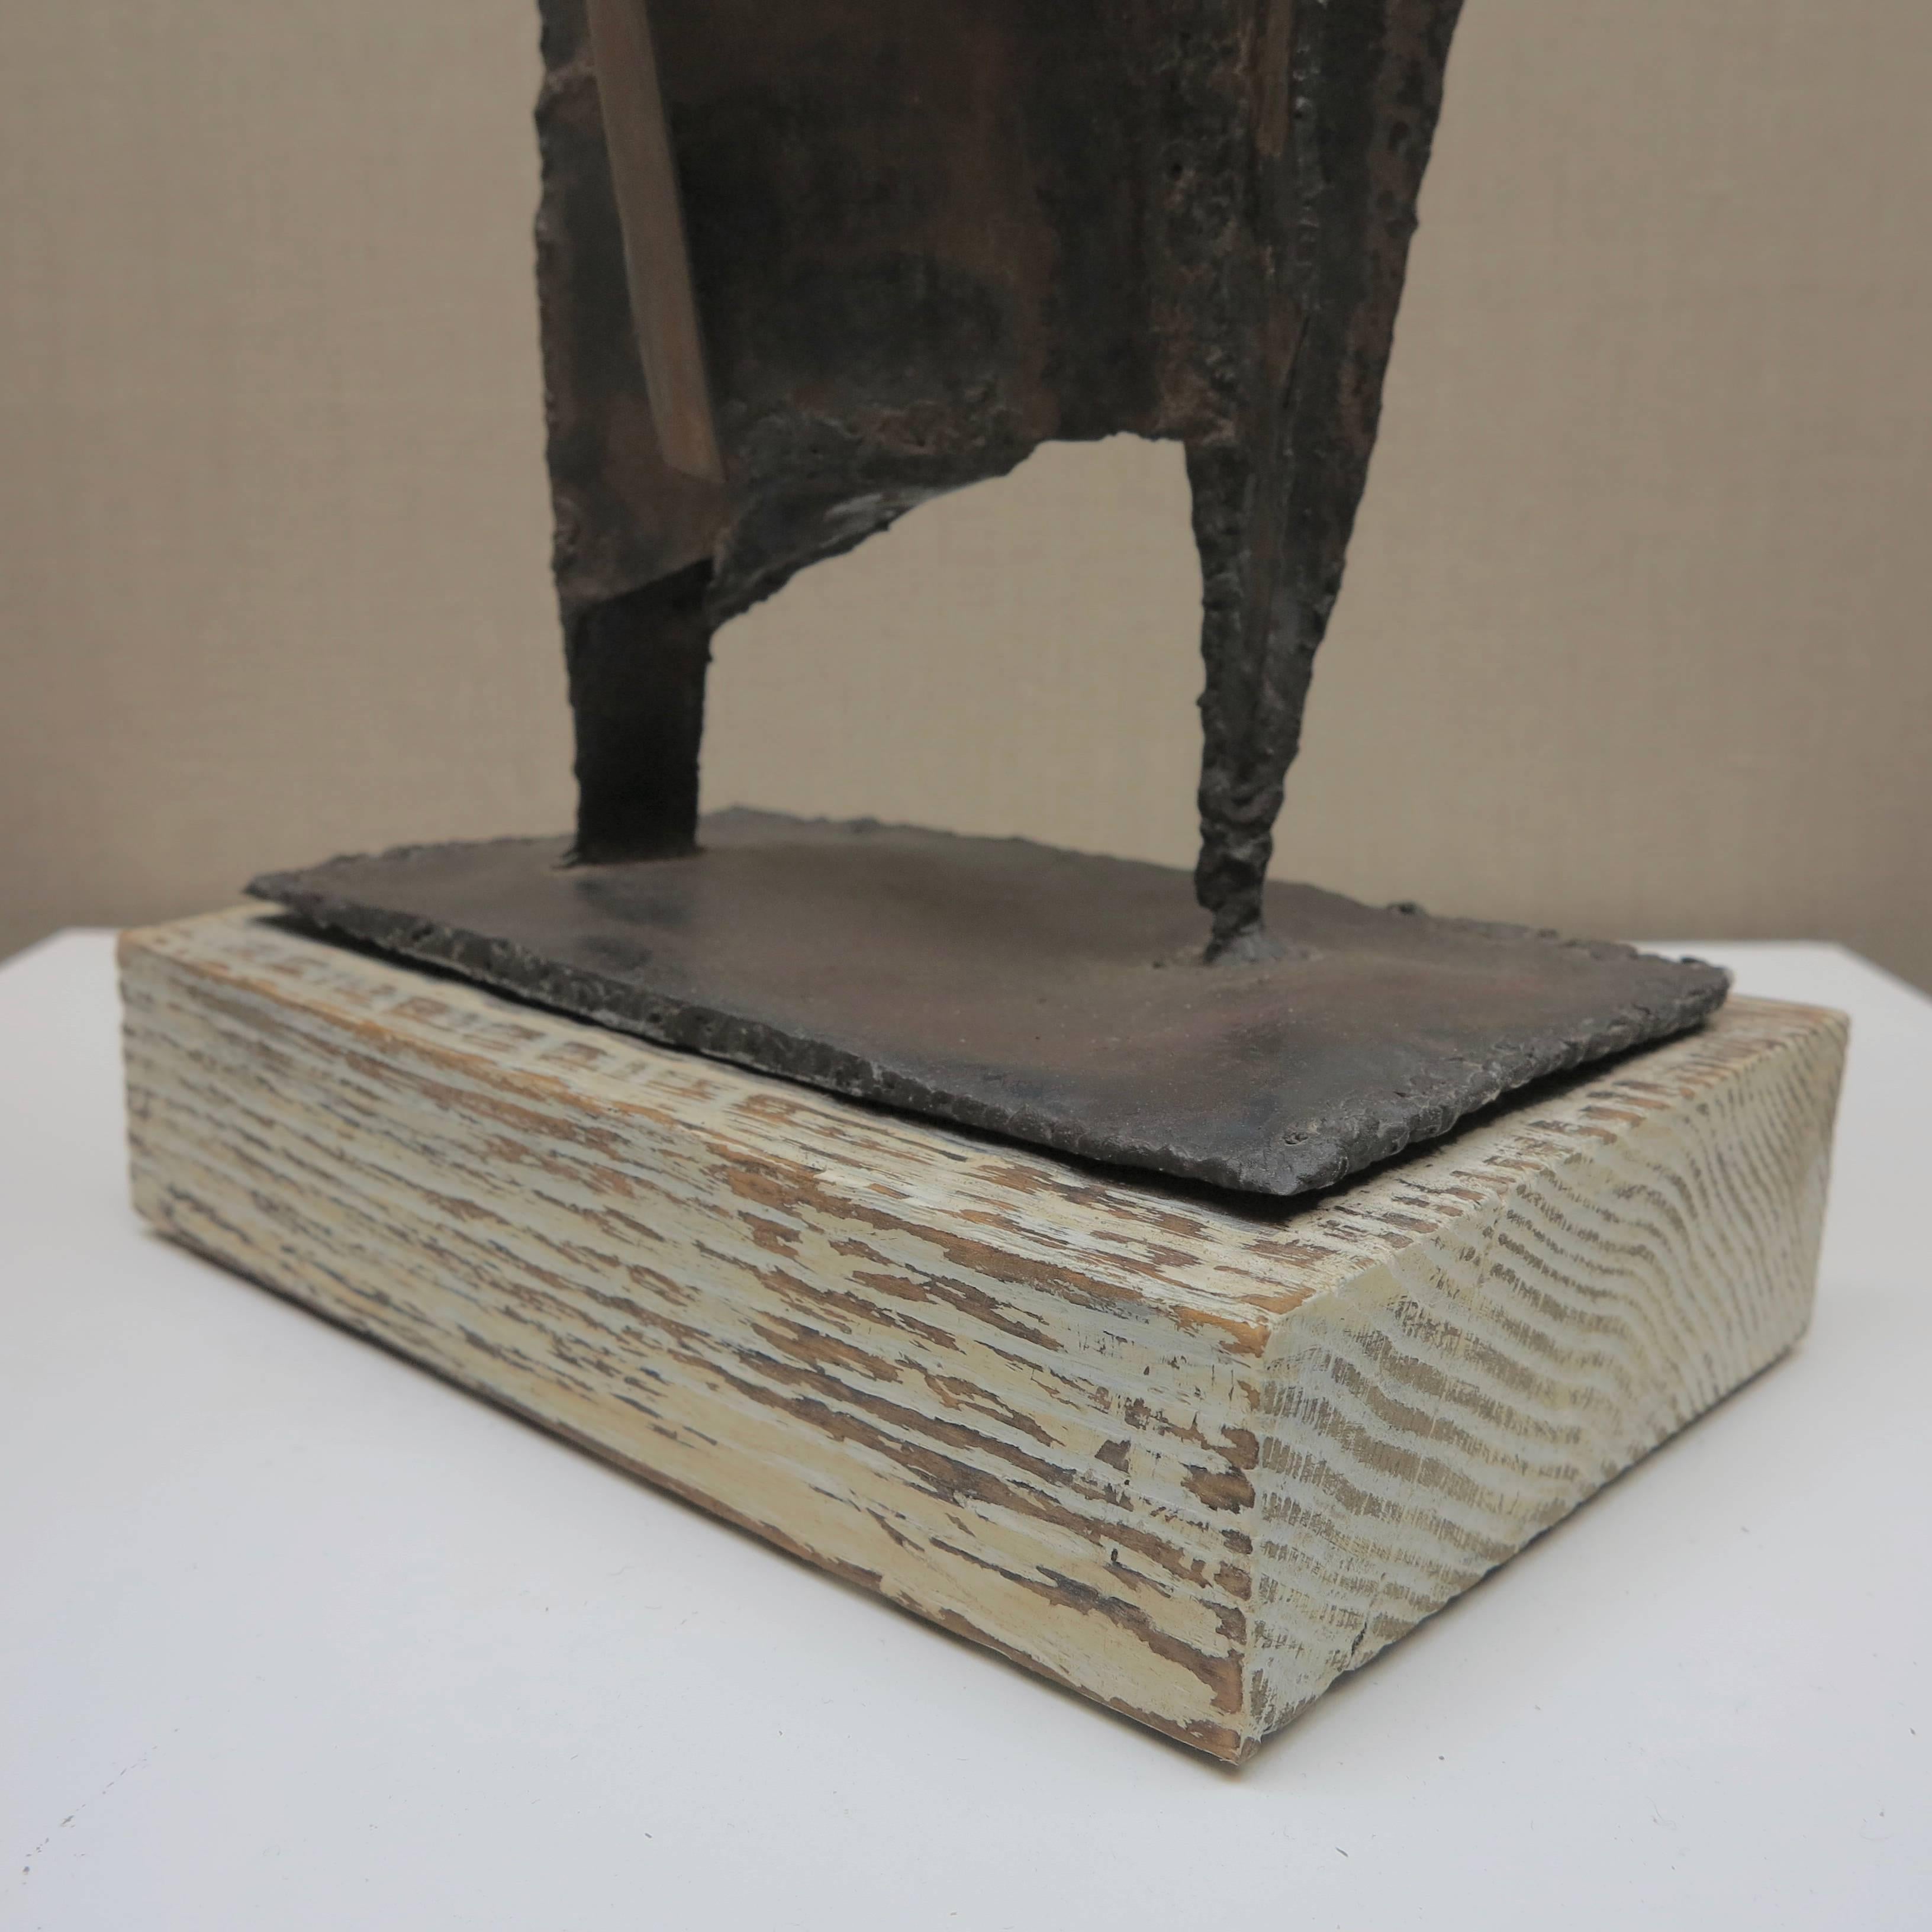 Bernard Brenner (1939-2007). Standing figure, c. 1960s. Welded steel on wood base, 25 x 9.5 x 6 inches. Excellent condition with no conservation.

Price on request

Biography:

Bernard Brenner was born in Philadelphia in 1927. After serving in the